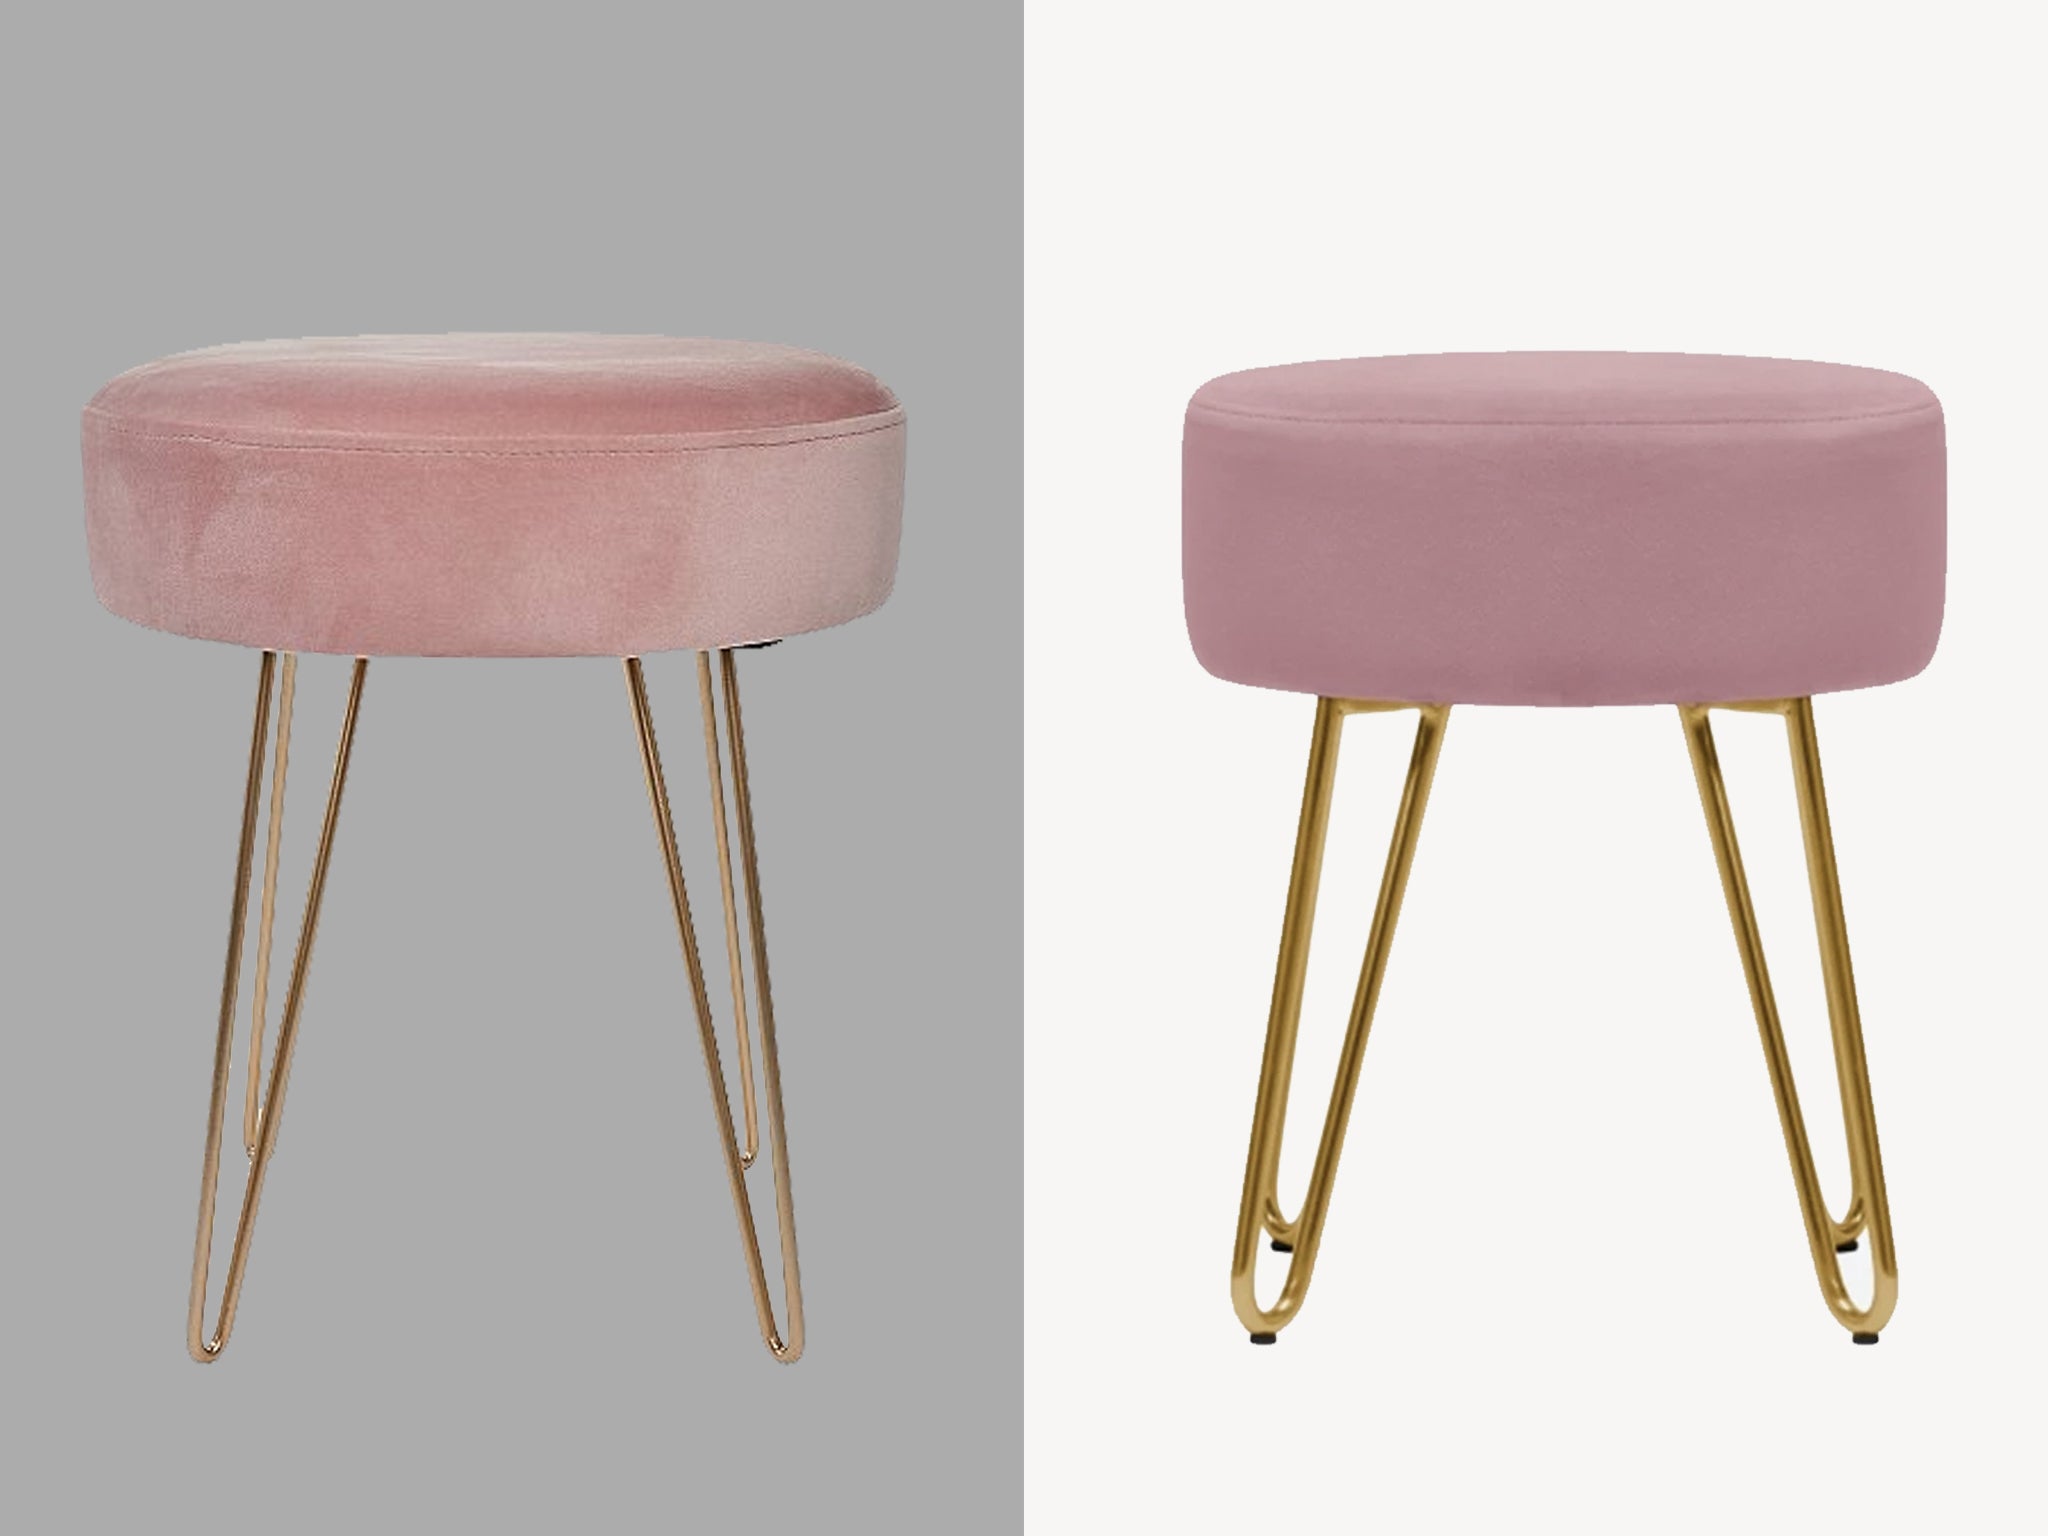 Asda’s stool on the left, and Fy!’s version on the right